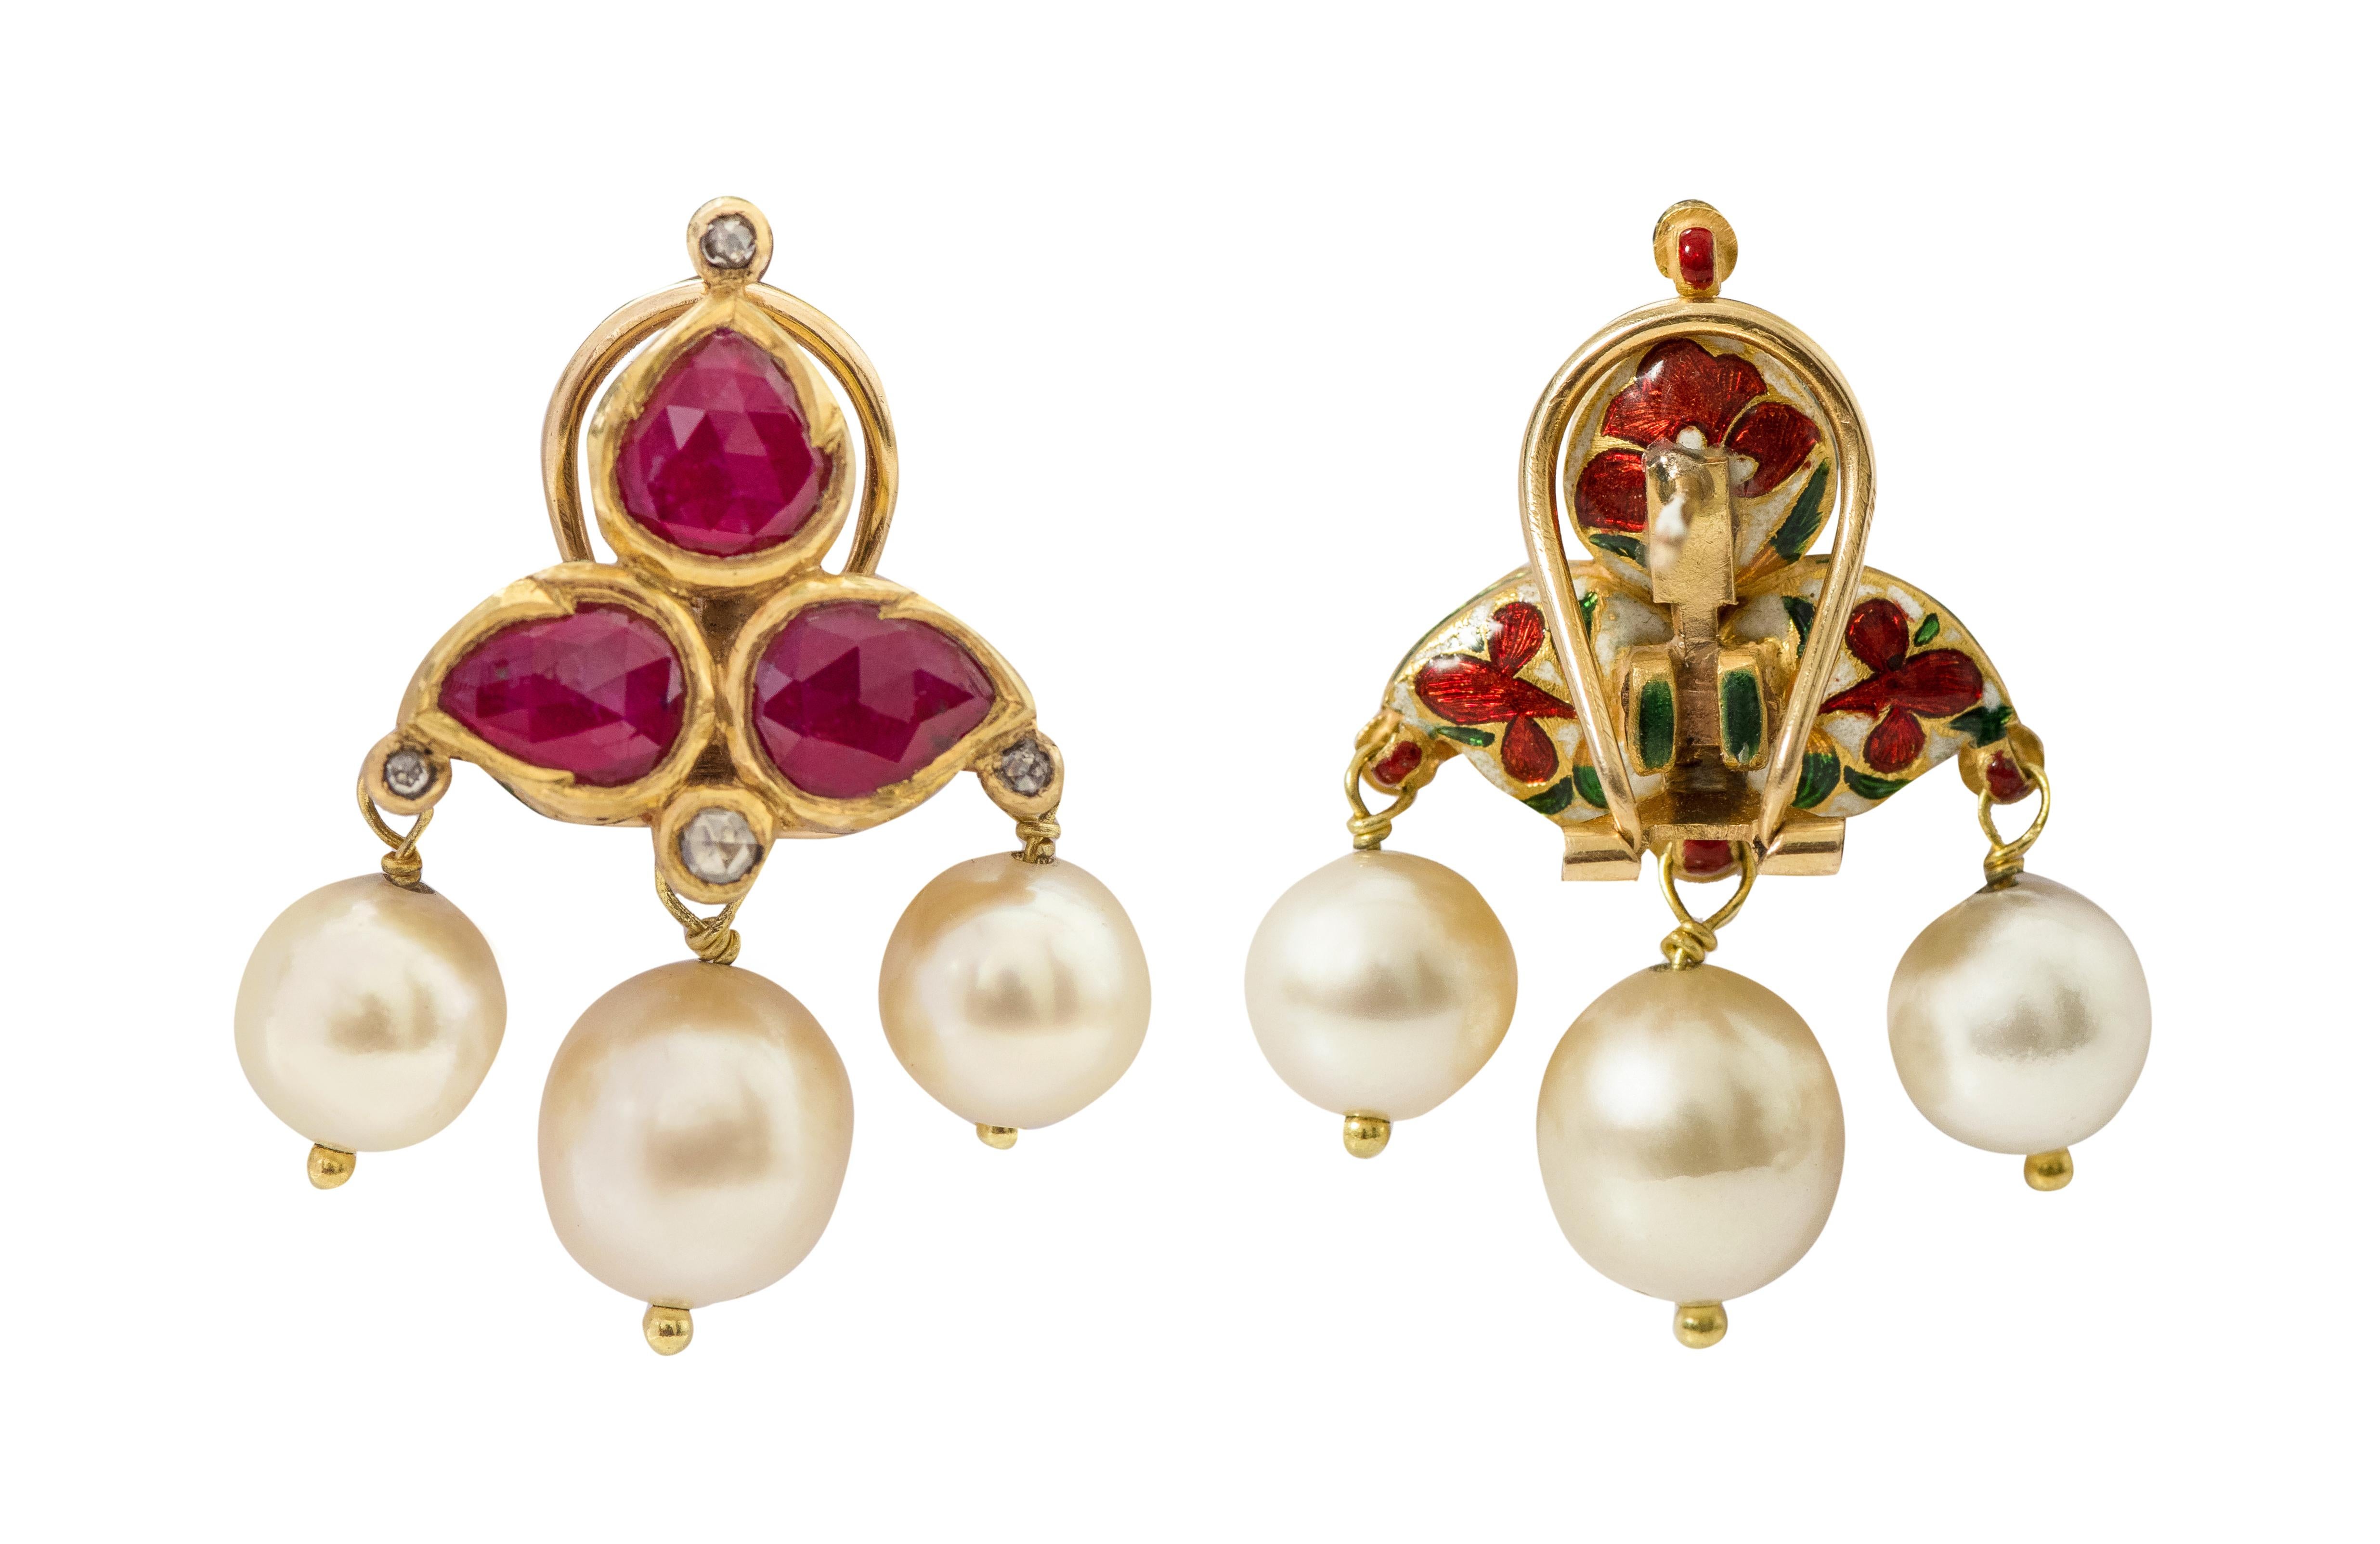 22 Karat Yellow Gold Ruby, Diamond, and Pearl Stud Earring with Multi-Color Enamel Work

This elegant Mughal era hand-made blood-red ruby and pearl earring is impressive. The top part of the earring is formed of a special cut of pear shape flat